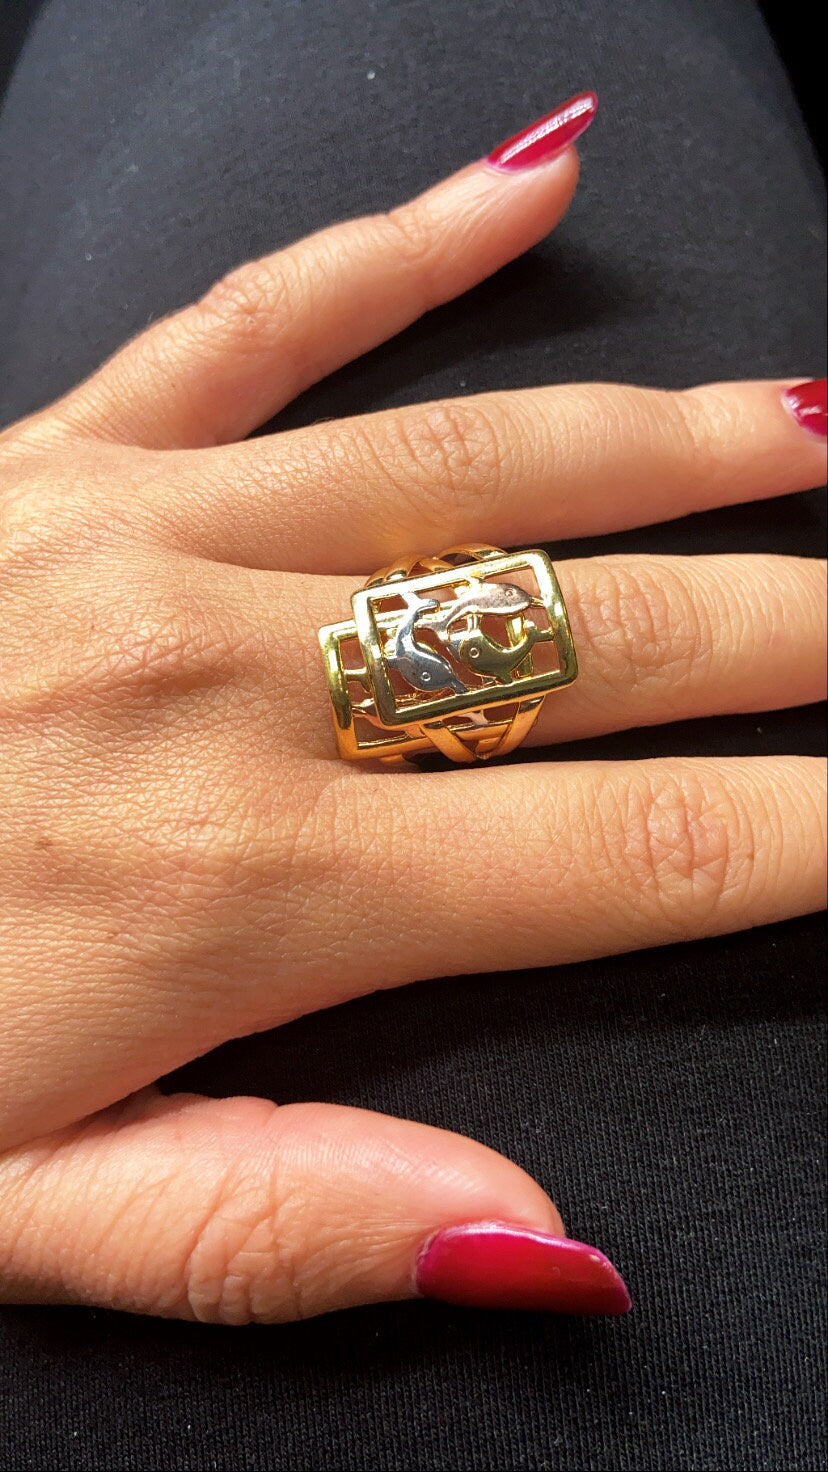 18k Gold Layered Ring With Tri-Colored Dolphins Hallowed Ring Tricolor Dolphins